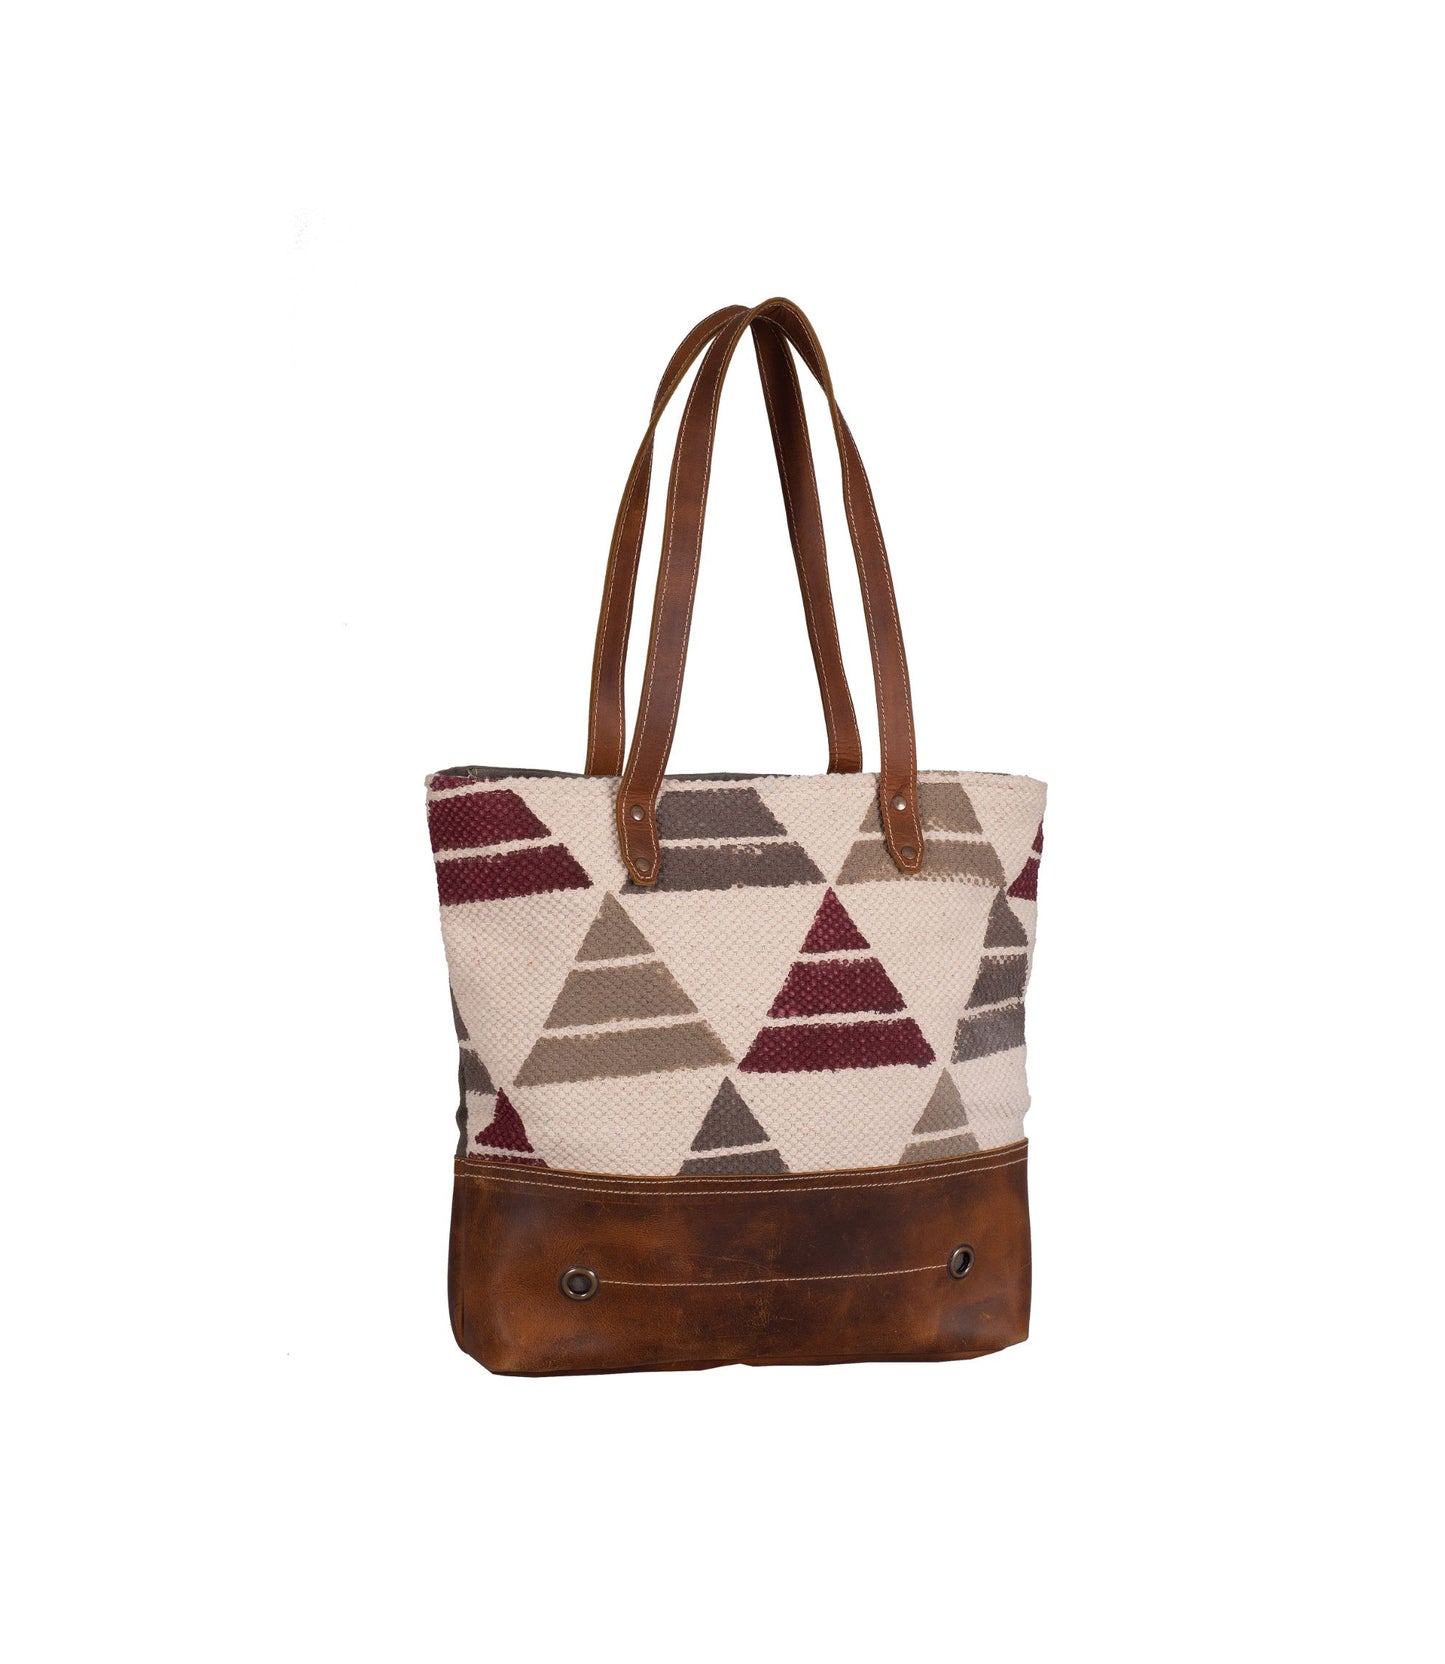 Tidy Triangles Tote Bag